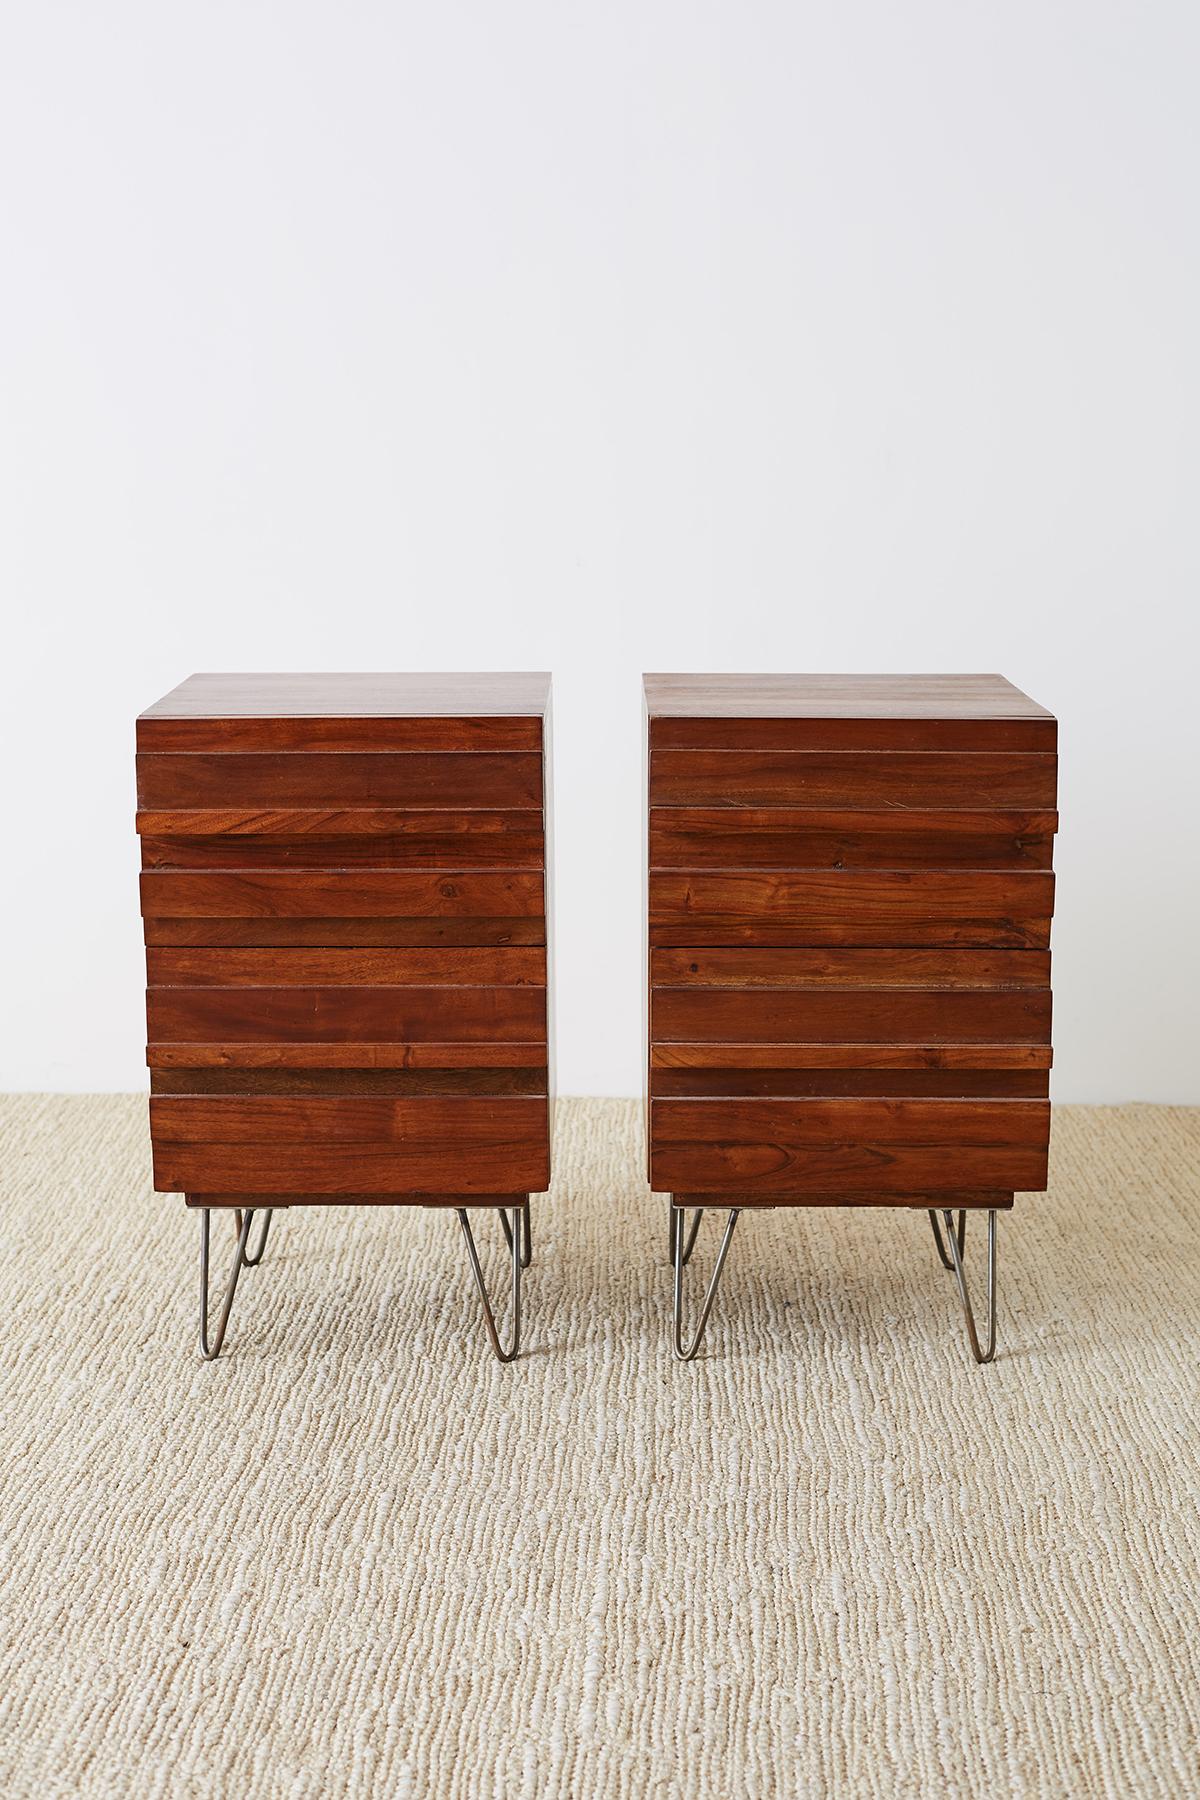 Hand-Crafted American Modern Style Mahogany Nightstands on Hairpin Legs